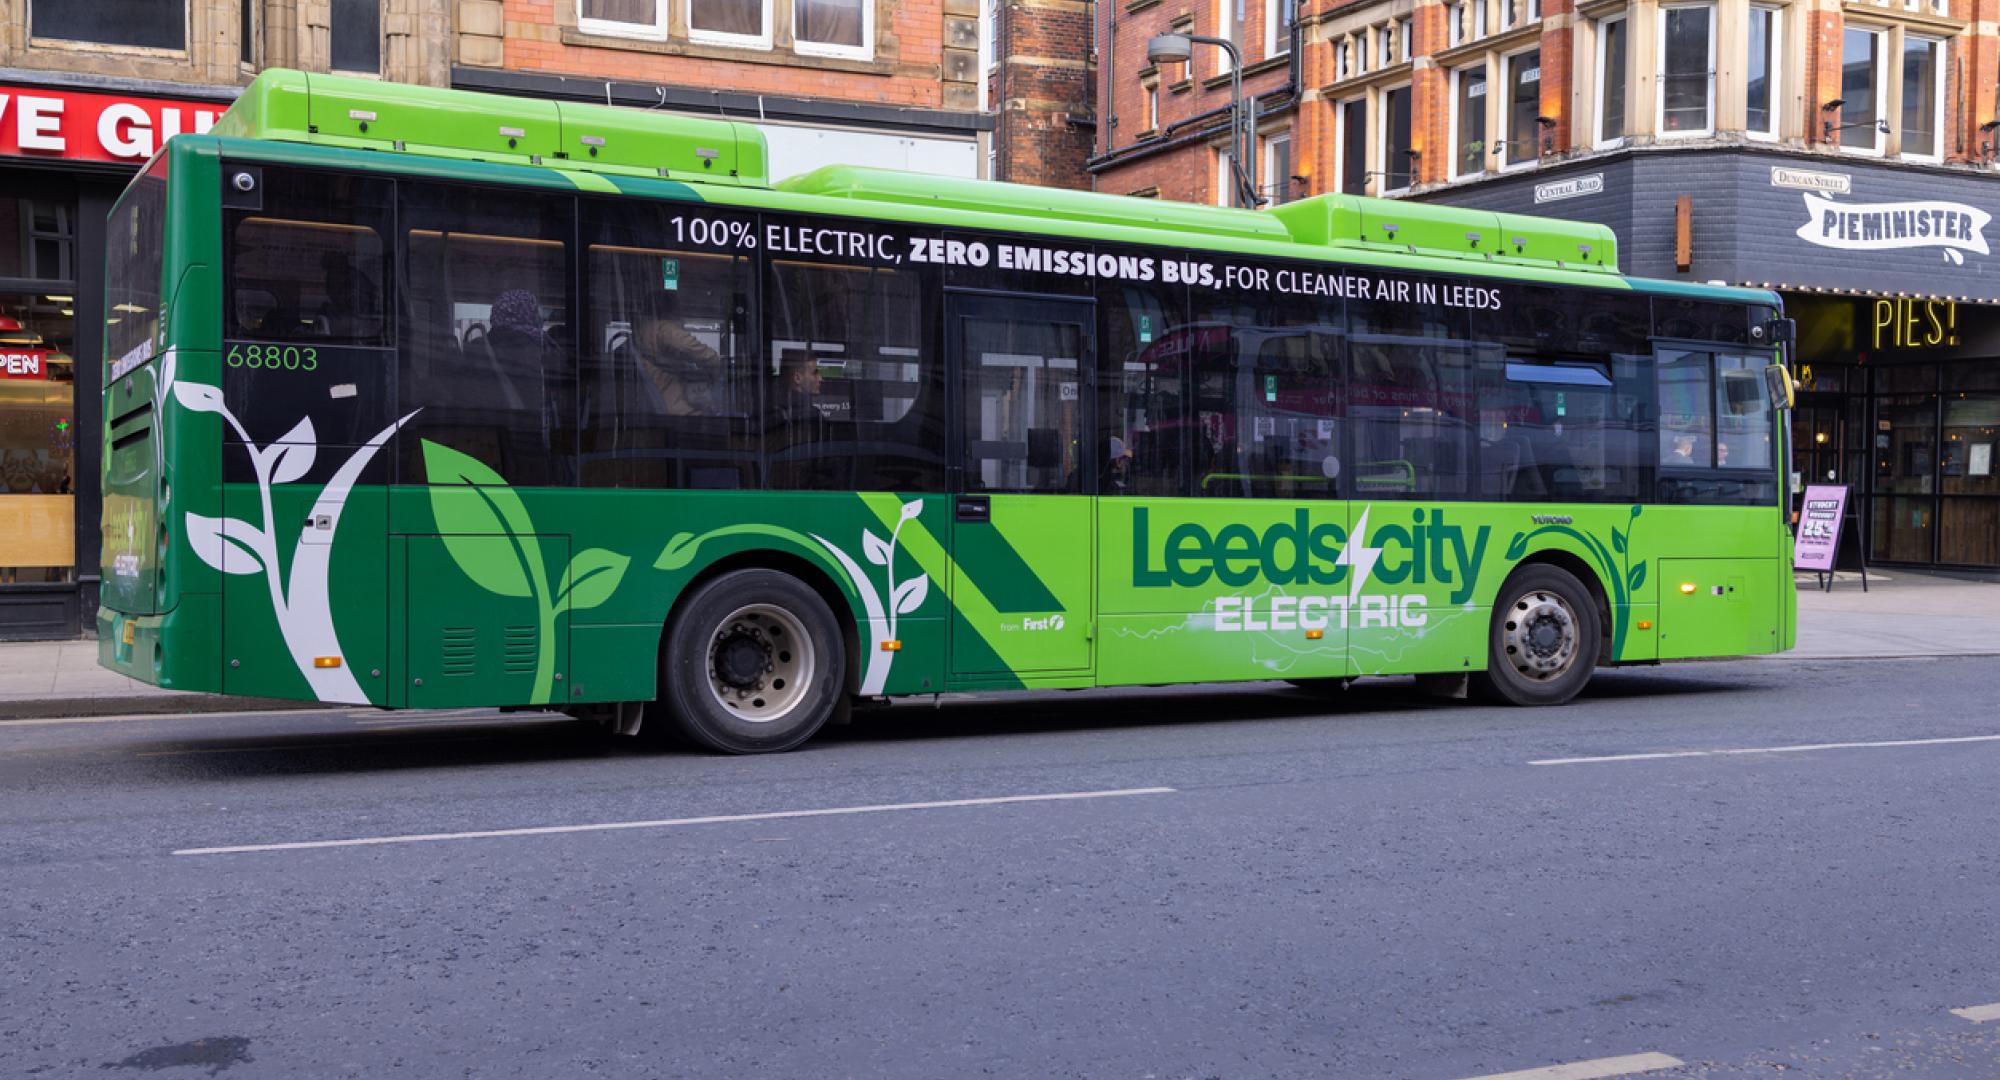 Photo taken in the Leeds City Centre showing an electric bus in the city, the bus is 100% Electric with zero Emissions for cleaner air in the Leeds City Centre